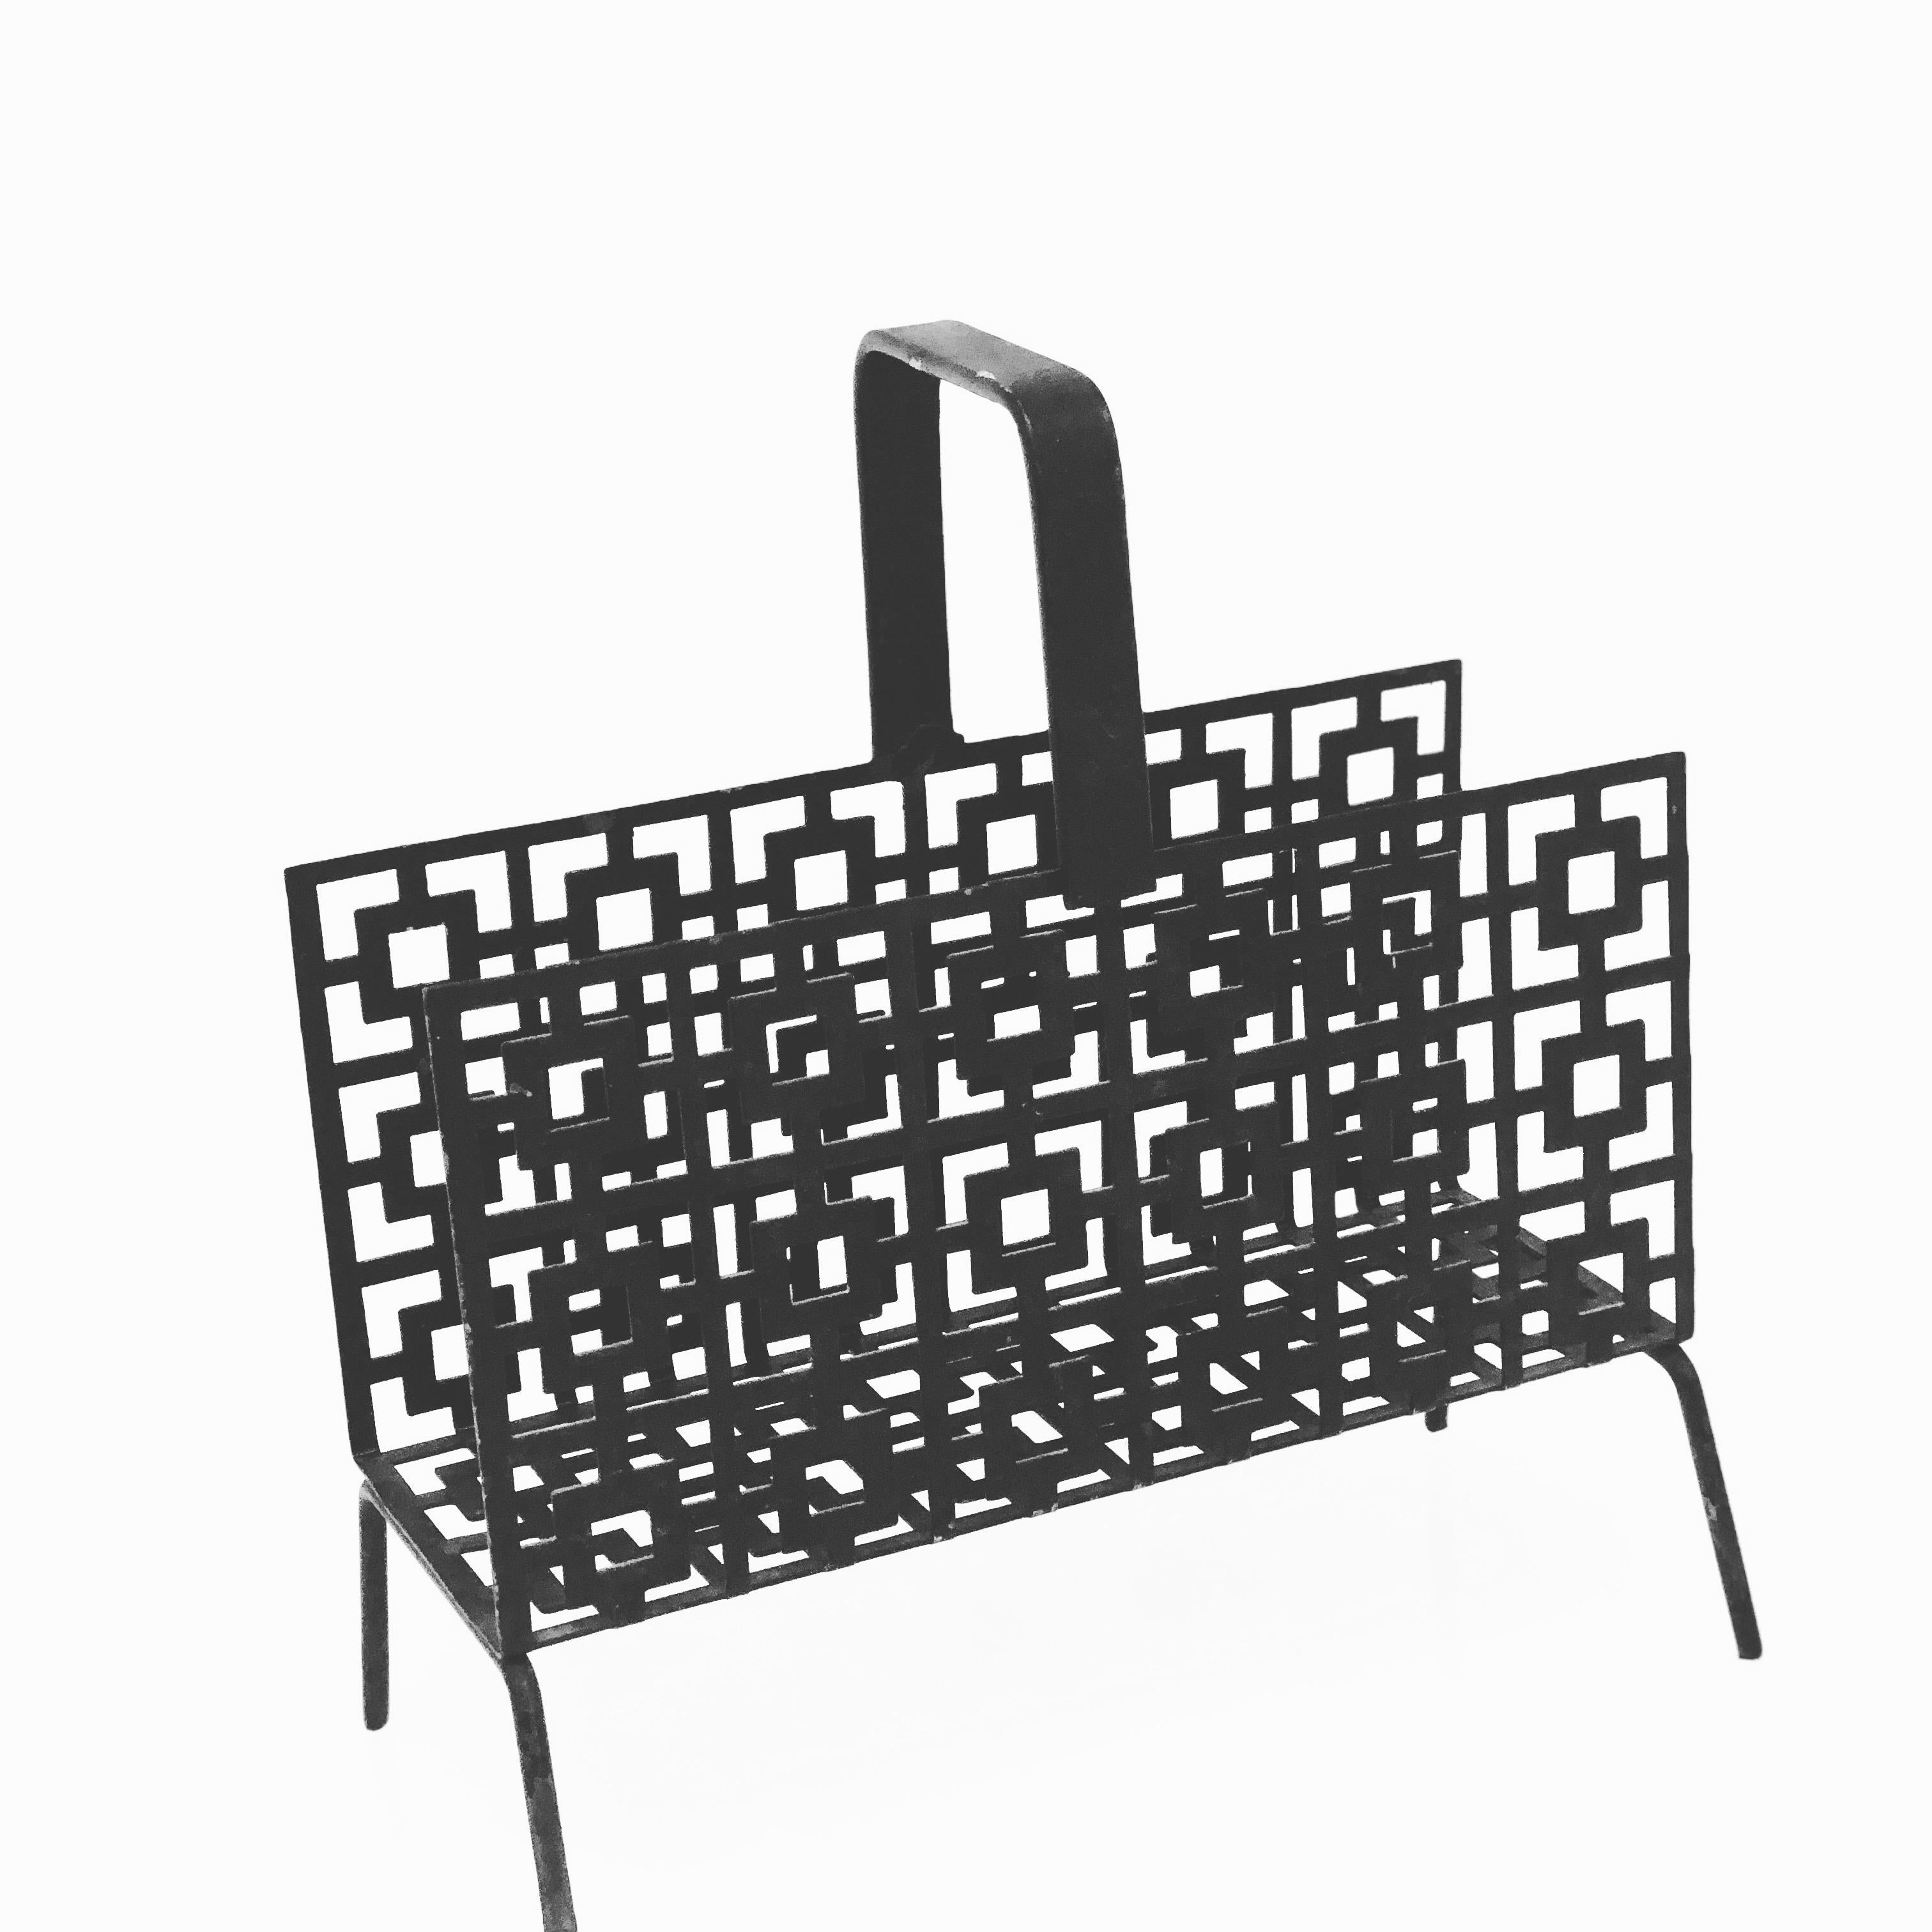 American Midcentury Perforated Metal Letter Holder